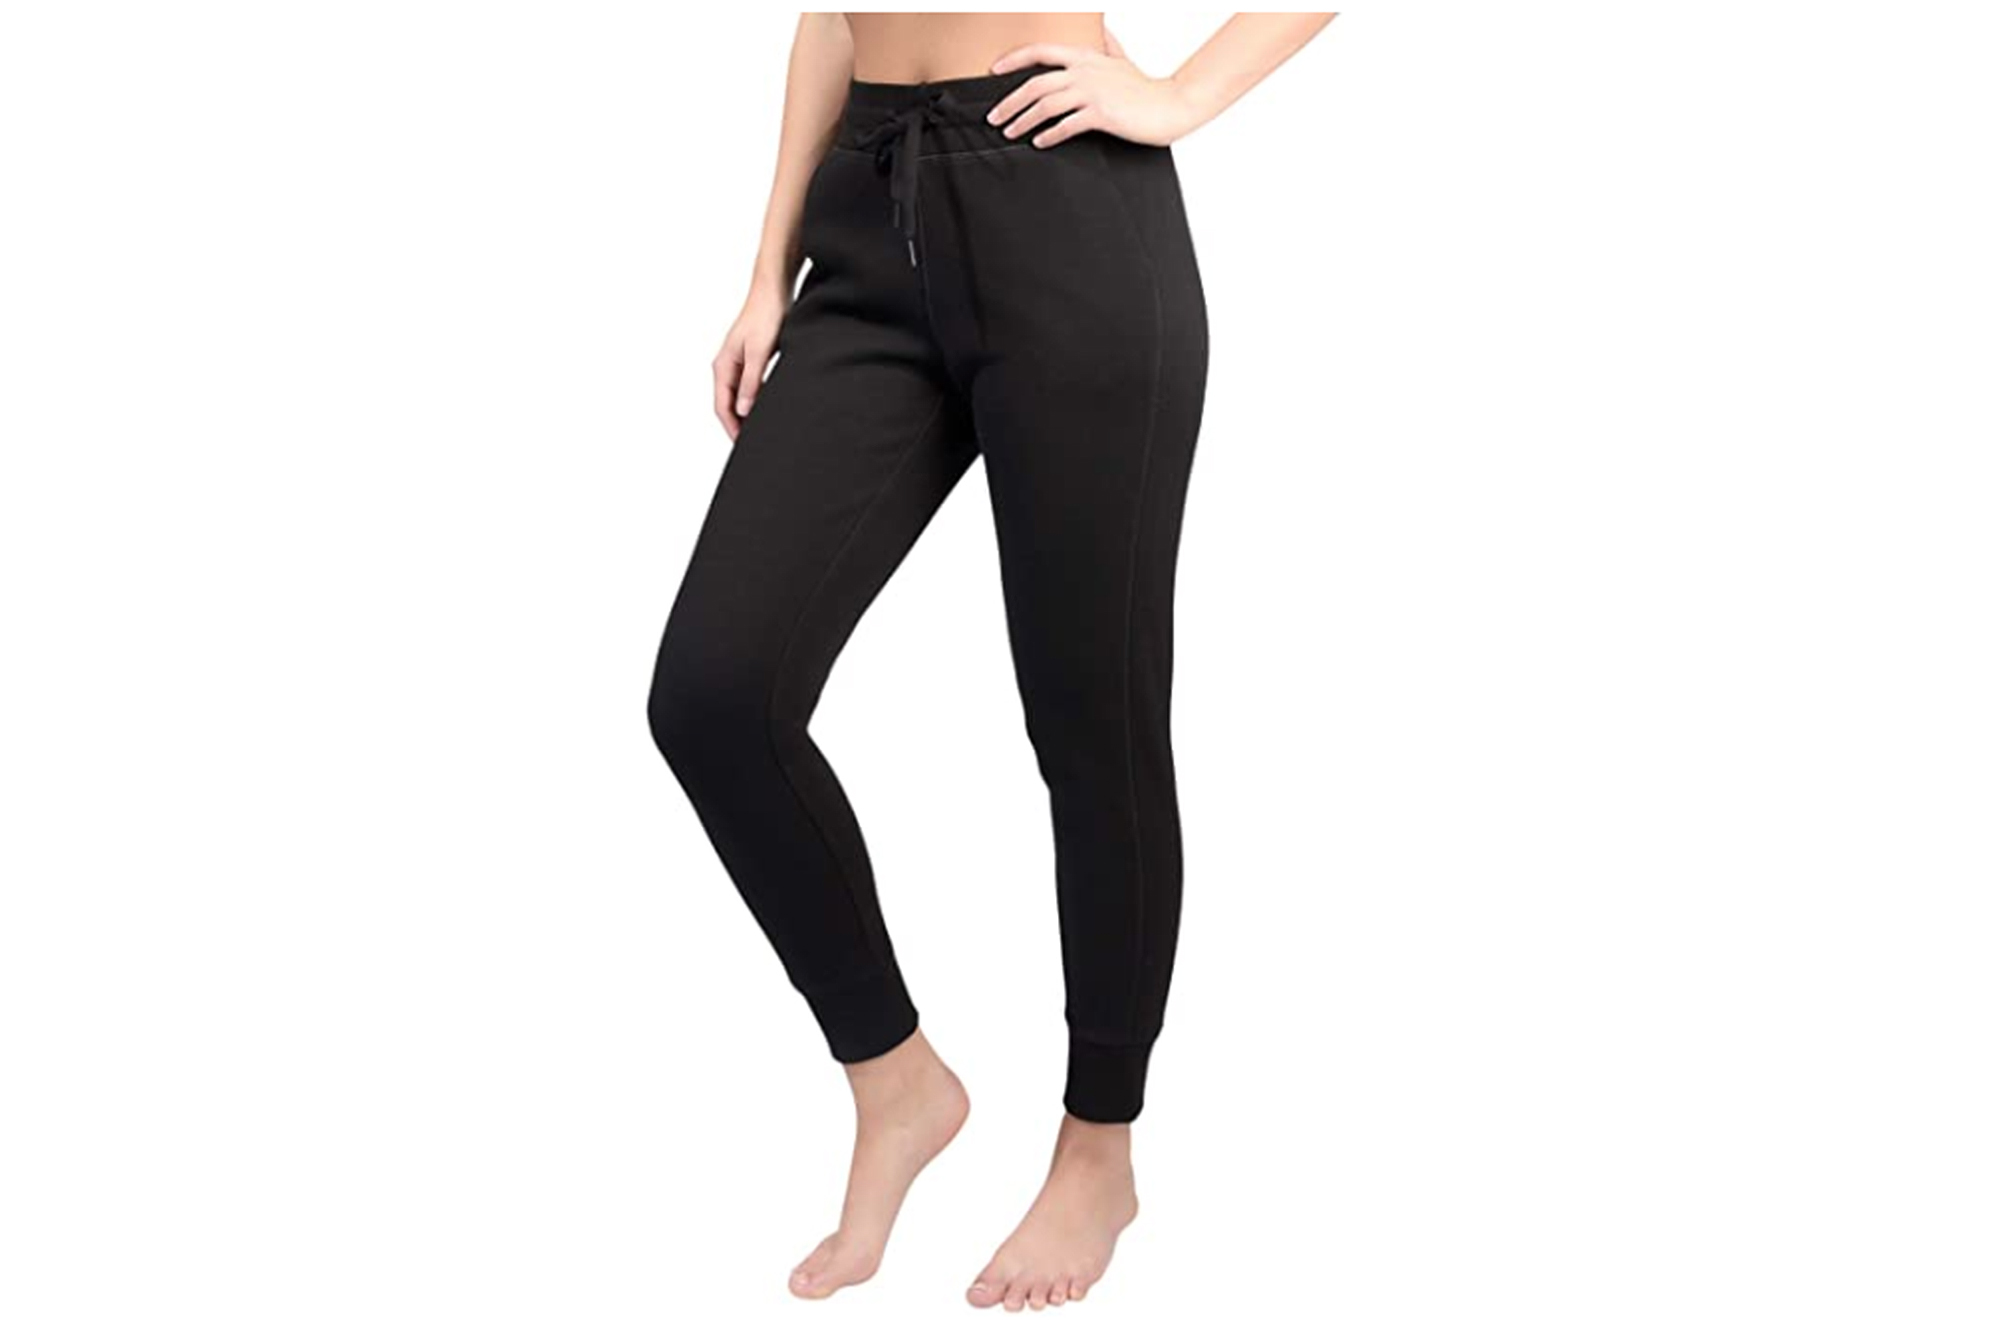 90 Degree by Reflex Pants Are the Ticket to Ultimate Relaxation